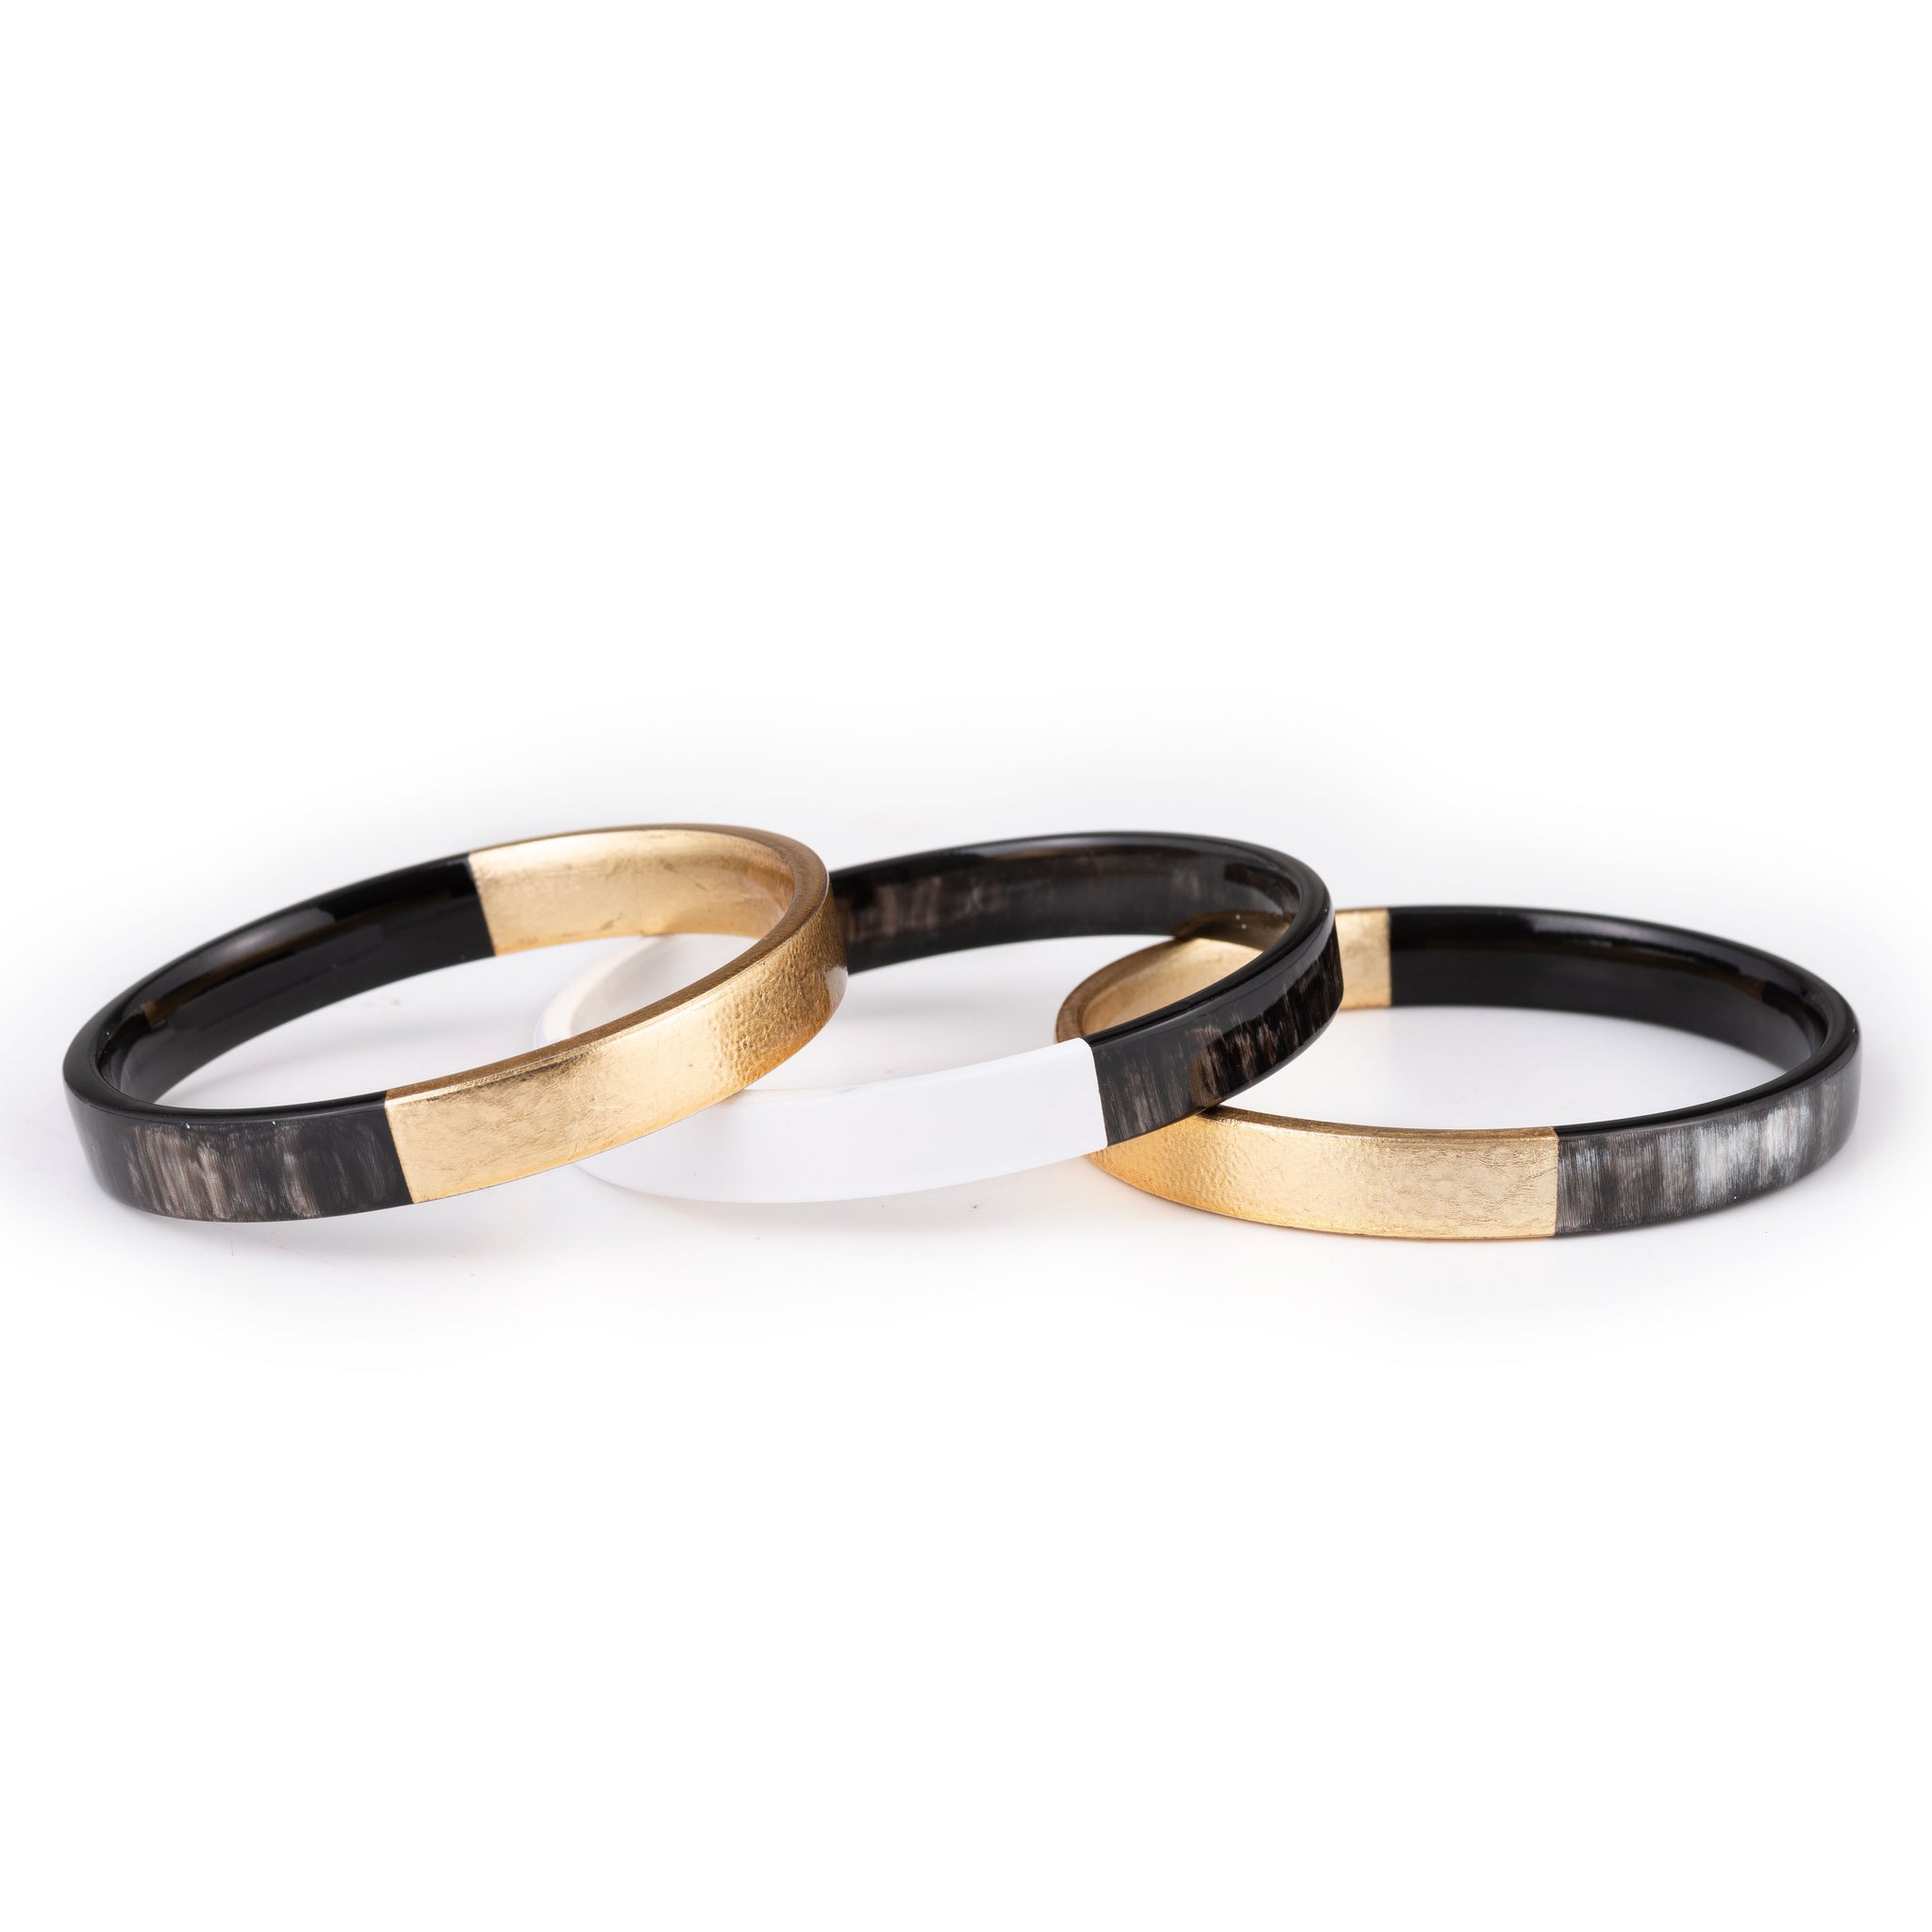 Horn Bangle Set Lacquer Accents